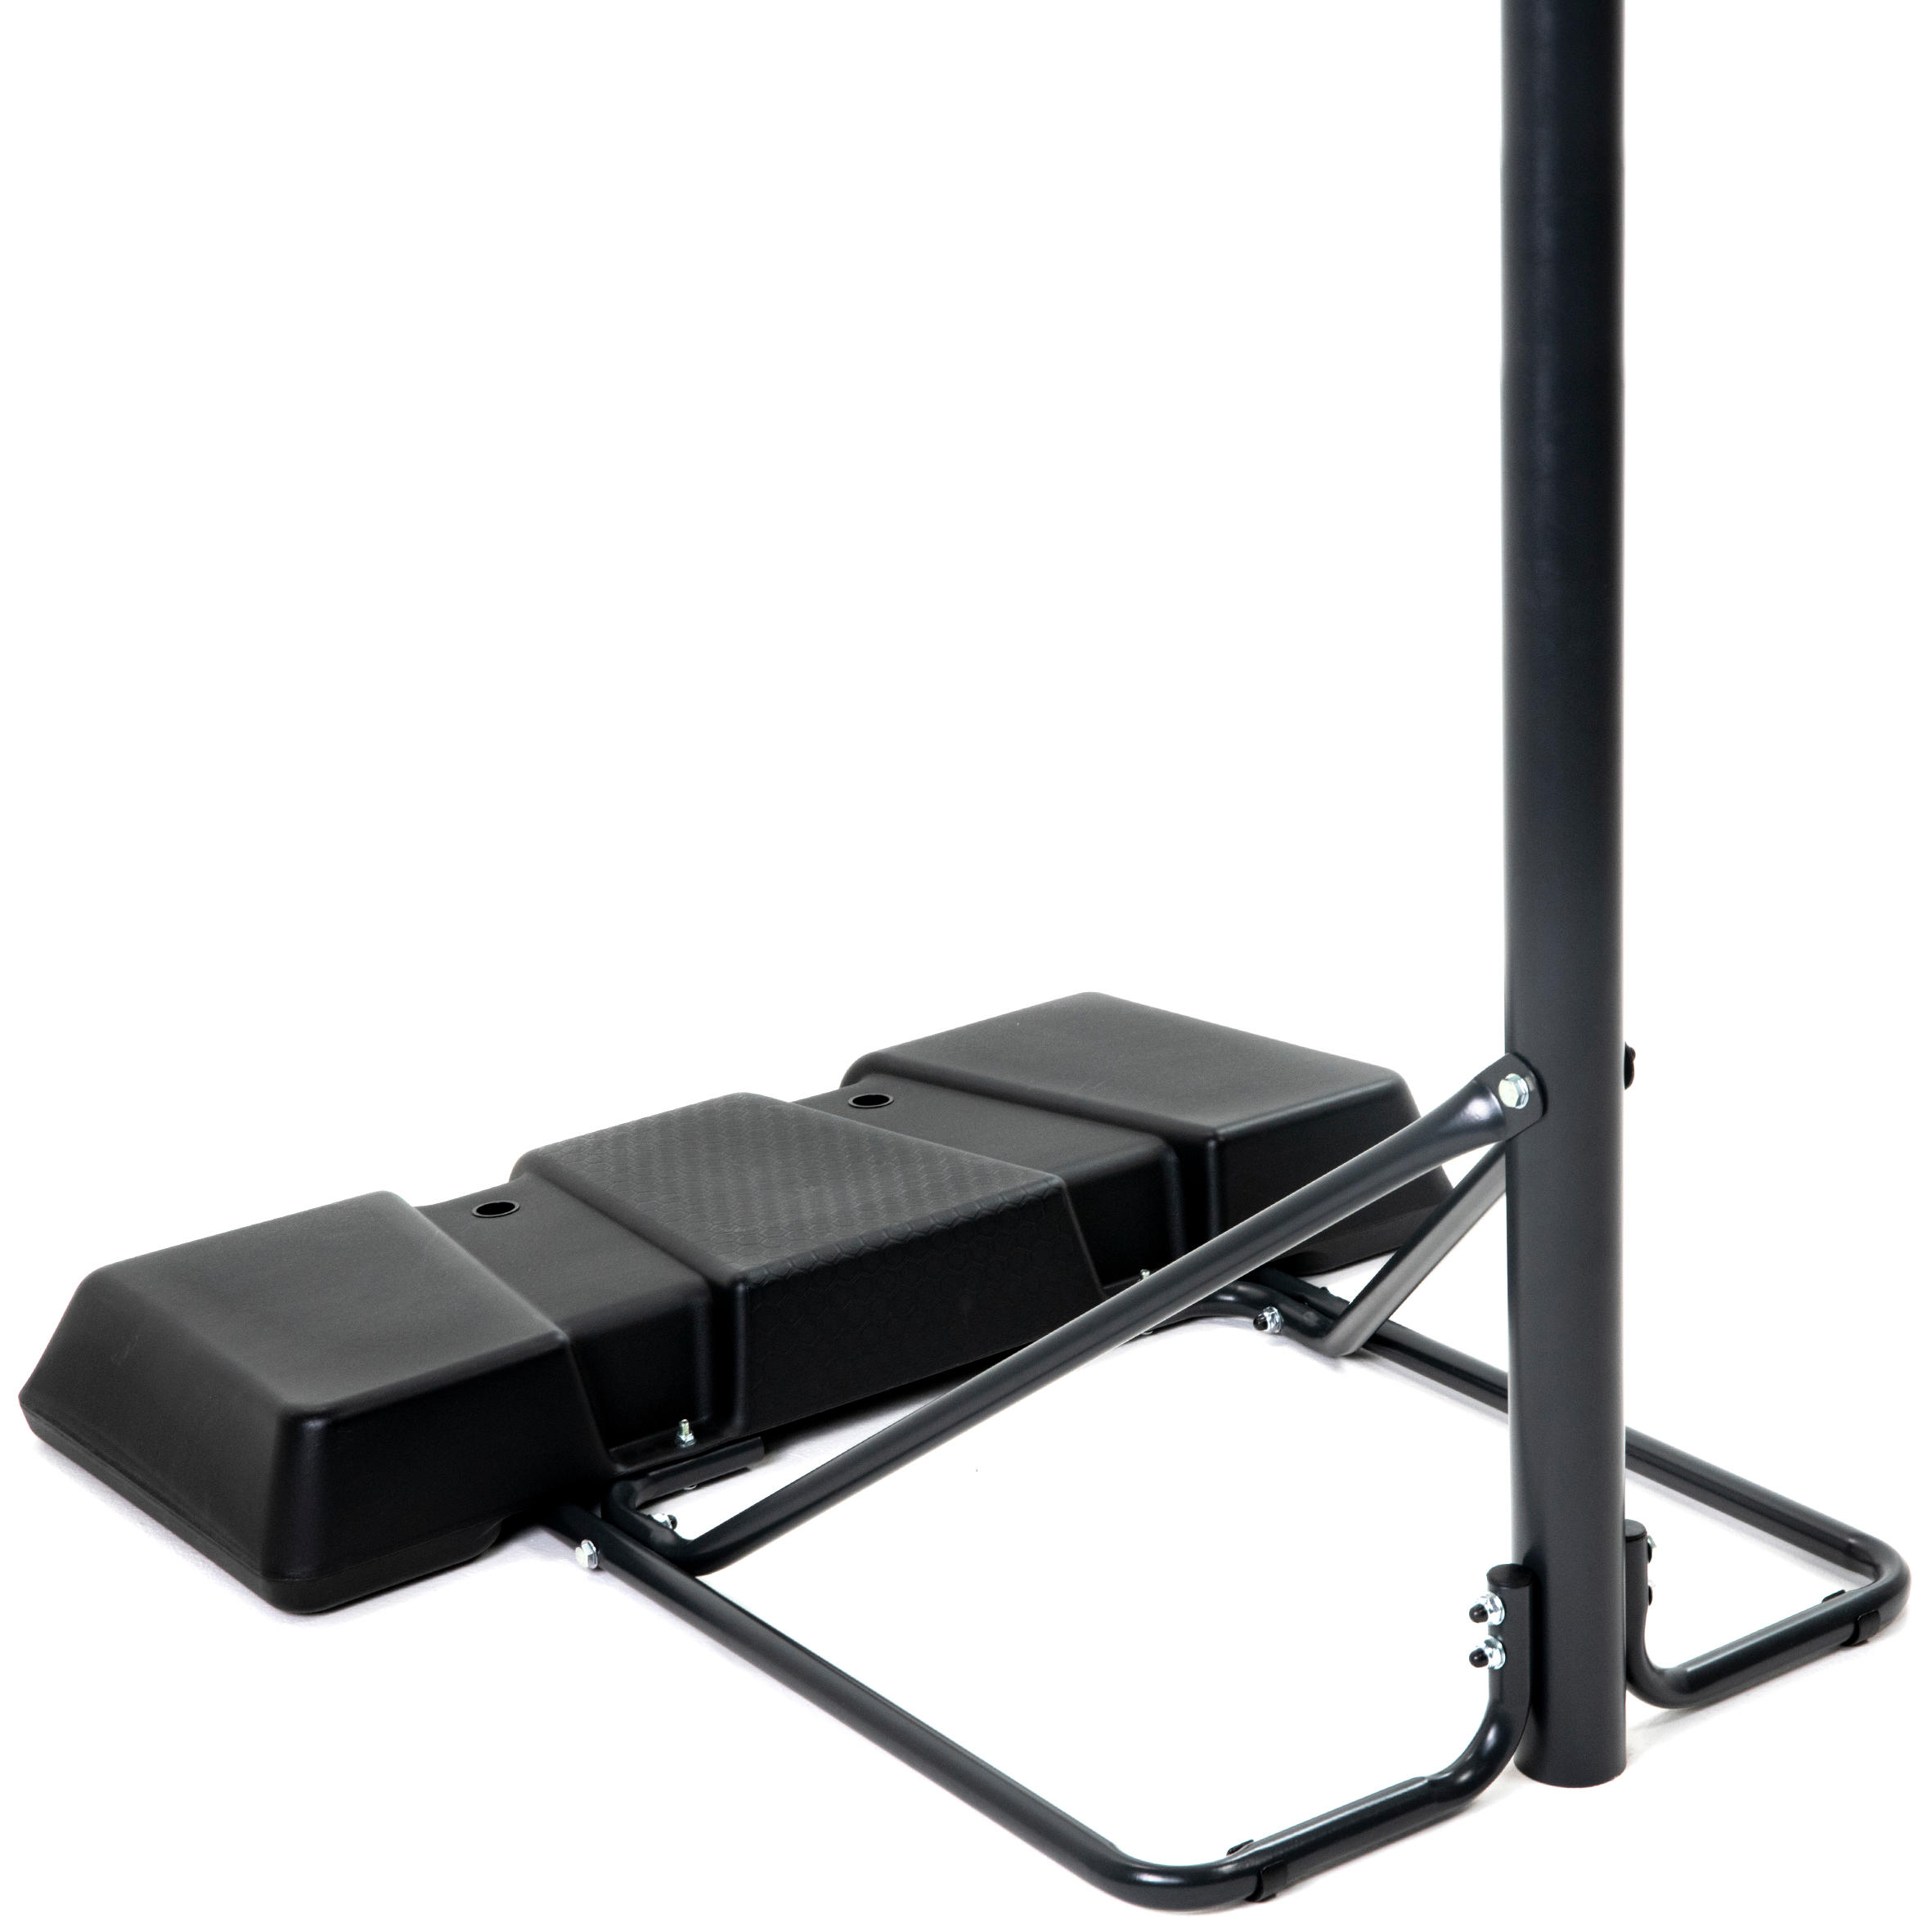 Basketball Hoop with Adjustable Stand (from 2.20 to 3.05m) B100 - Black 7/12